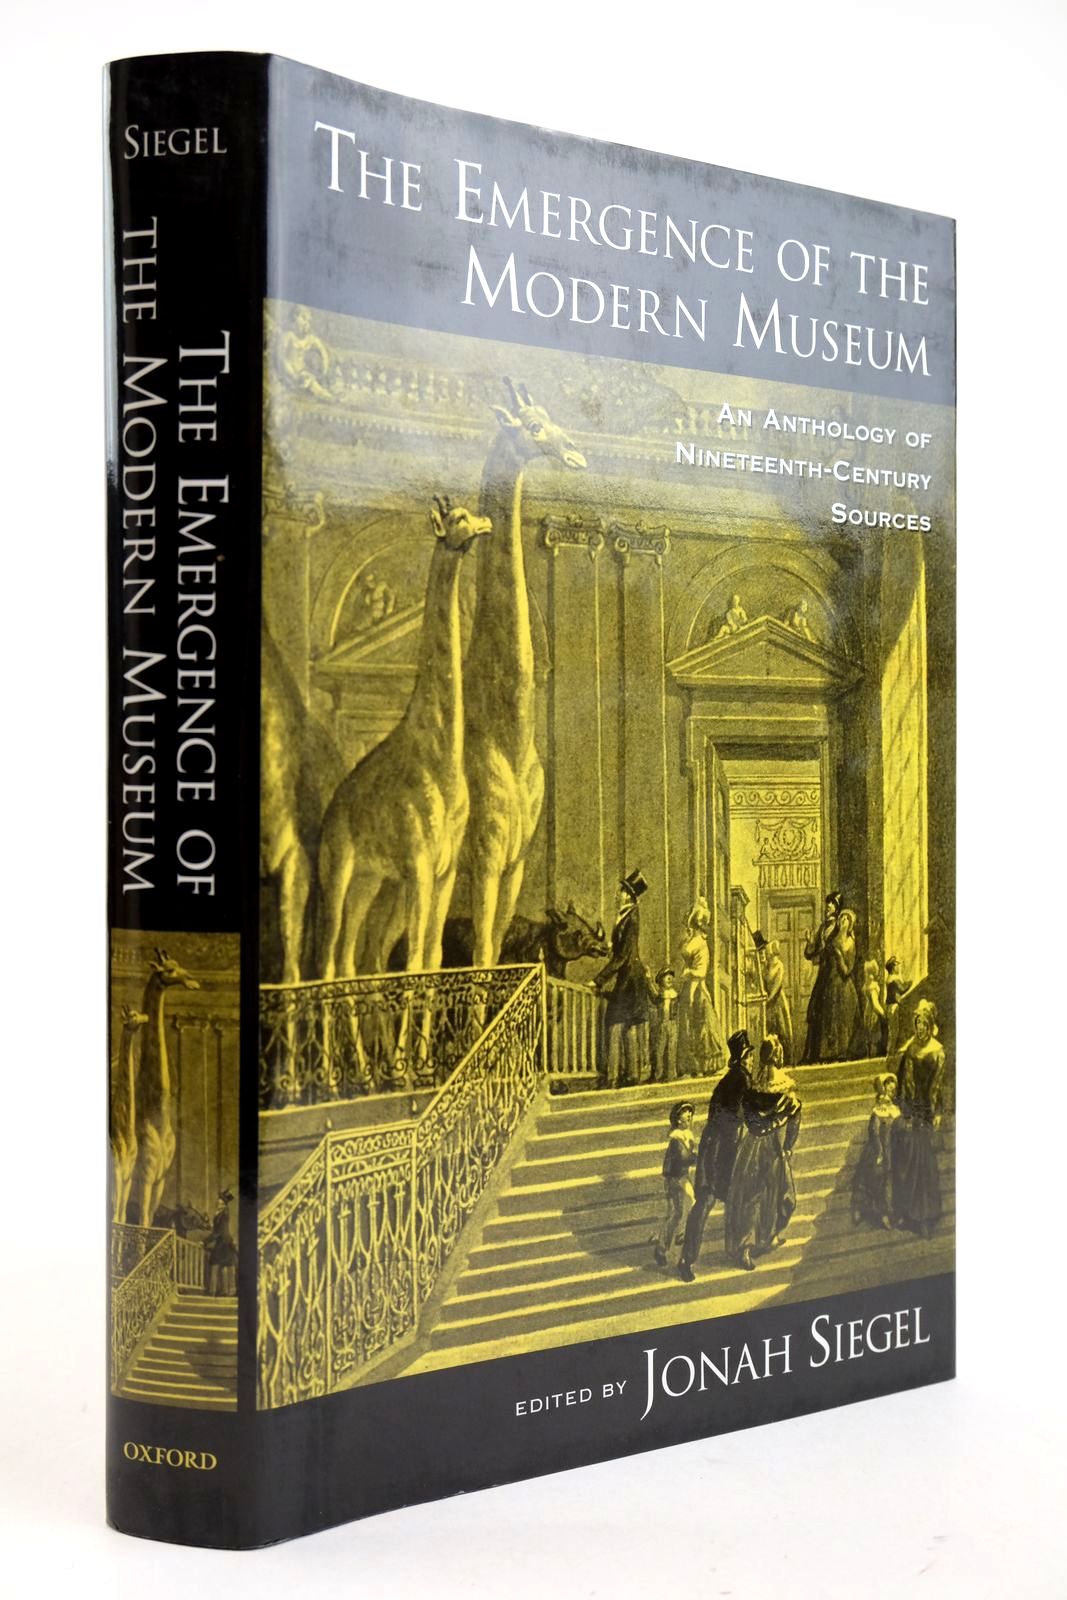 Photo of THE EMERGENCE OF THE MODERN MUSEUM written by Siegel, Jonah published by Oxford University Press (STOCK CODE: 2132939)  for sale by Stella & Rose's Books